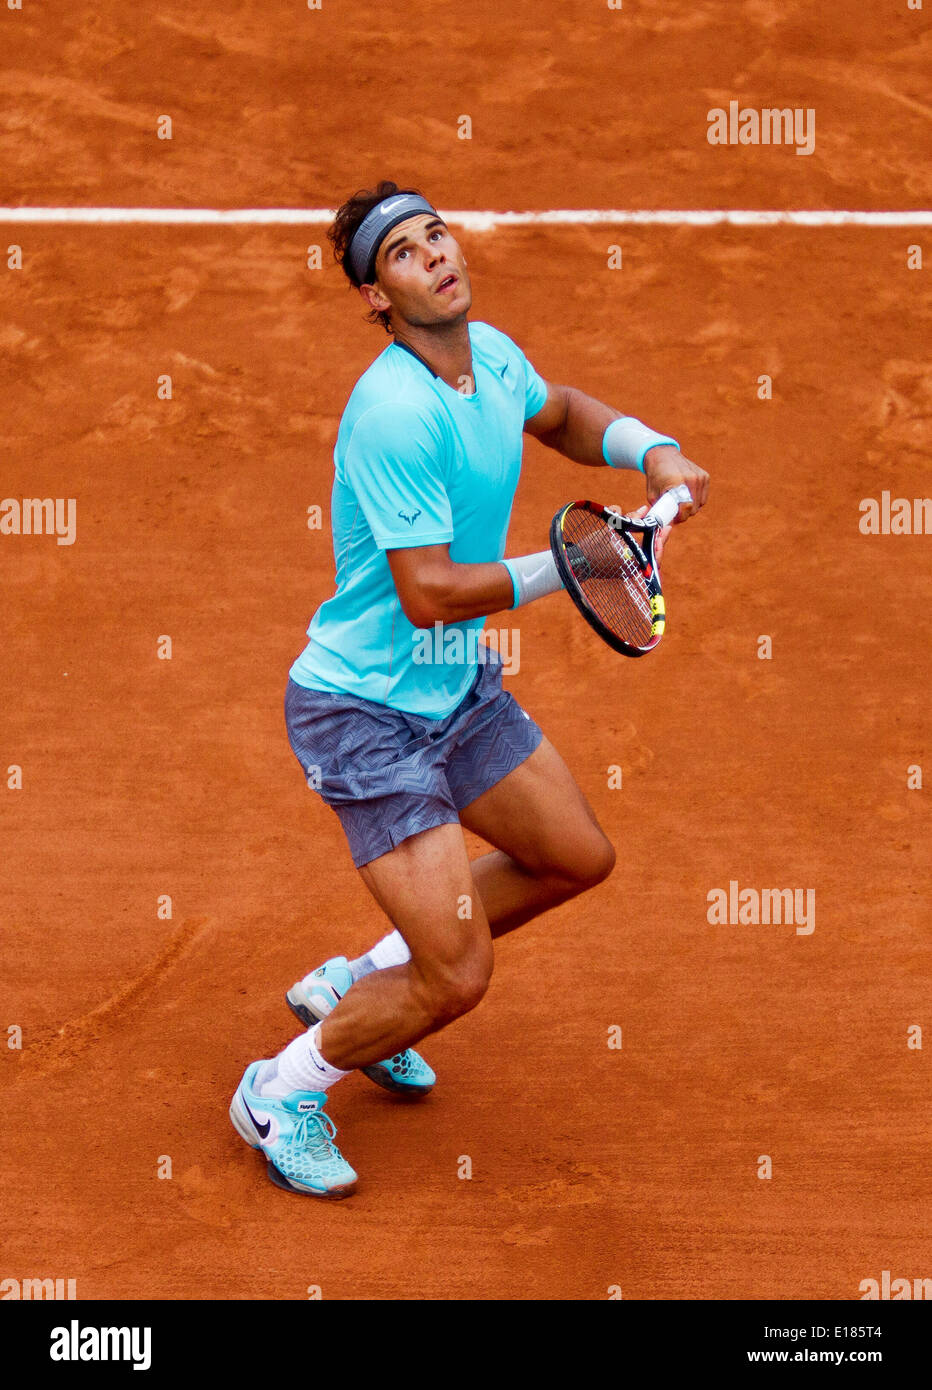 France, Paris, 26th May, 2014. Tennis, Roland Garros, Rafael Nadal (ESP) is anticipating a smash in his match against Robby Ginepri (USA) Photo:Tennisimages/Henk Koster/Alamy Live News Stock Photo